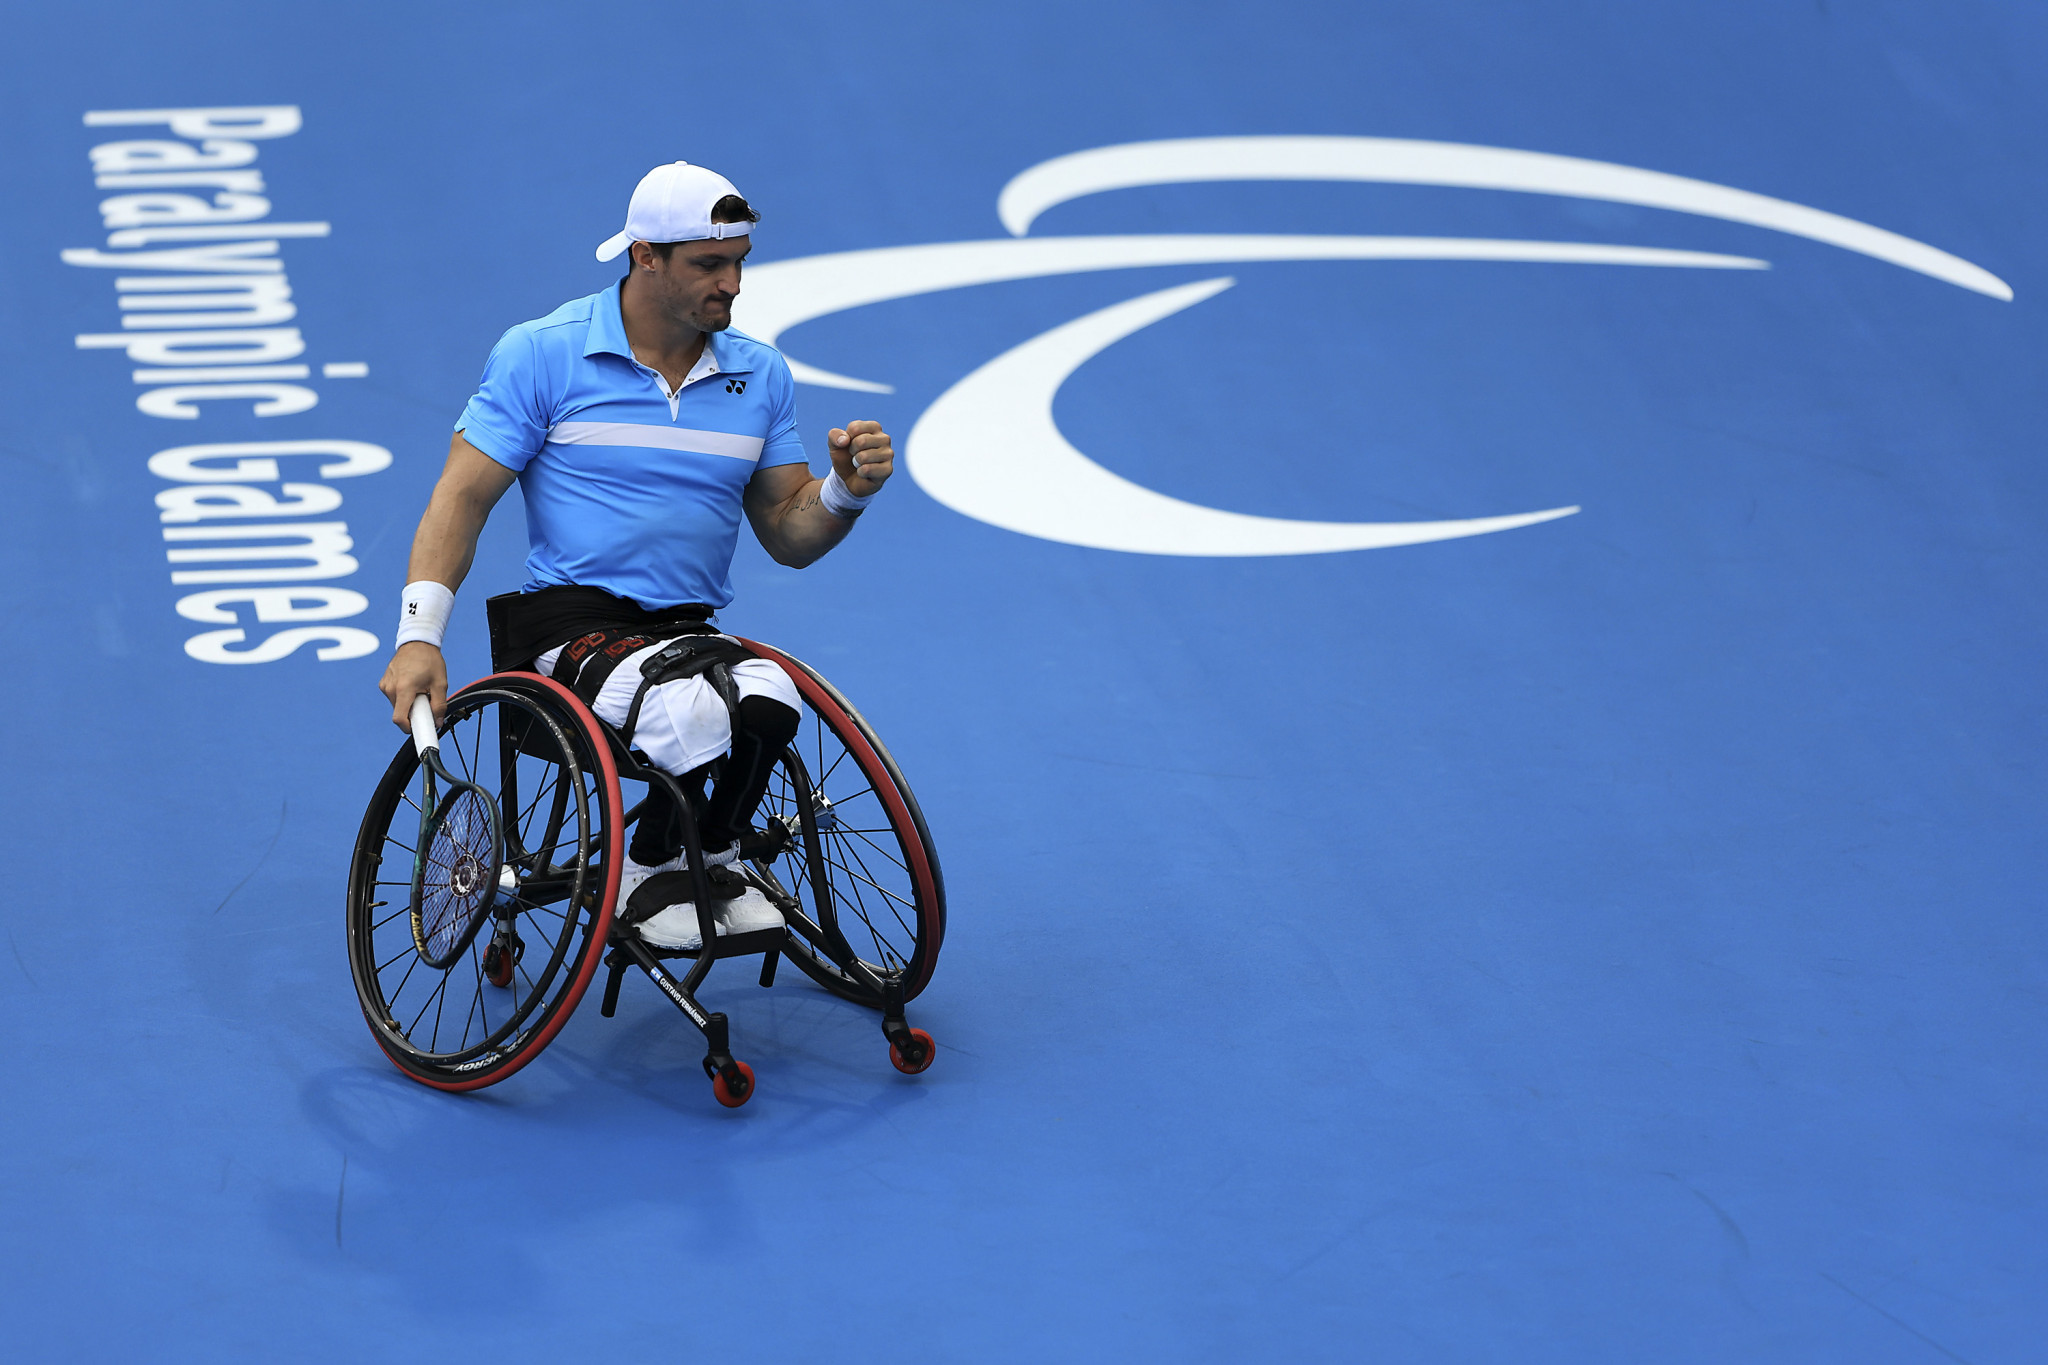 Men's singles top ranked players continue perfect start to NEC Wheelchair Tennis Masters